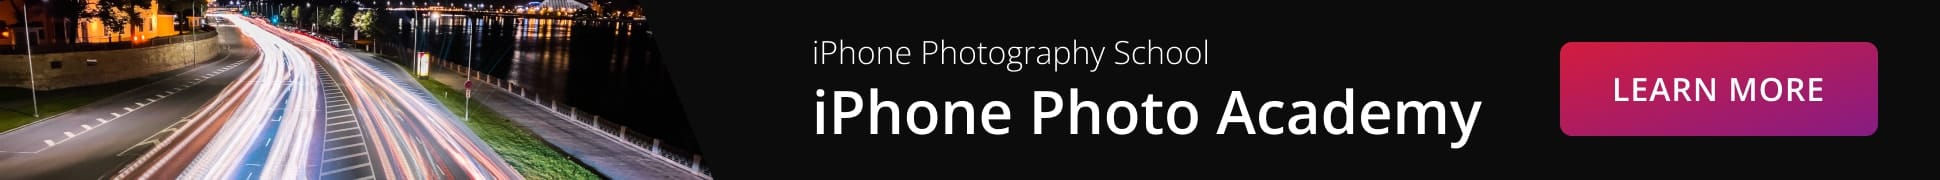 Promotional image for iPhone Photography Academy featuring a lit road photo with 'Learn More'